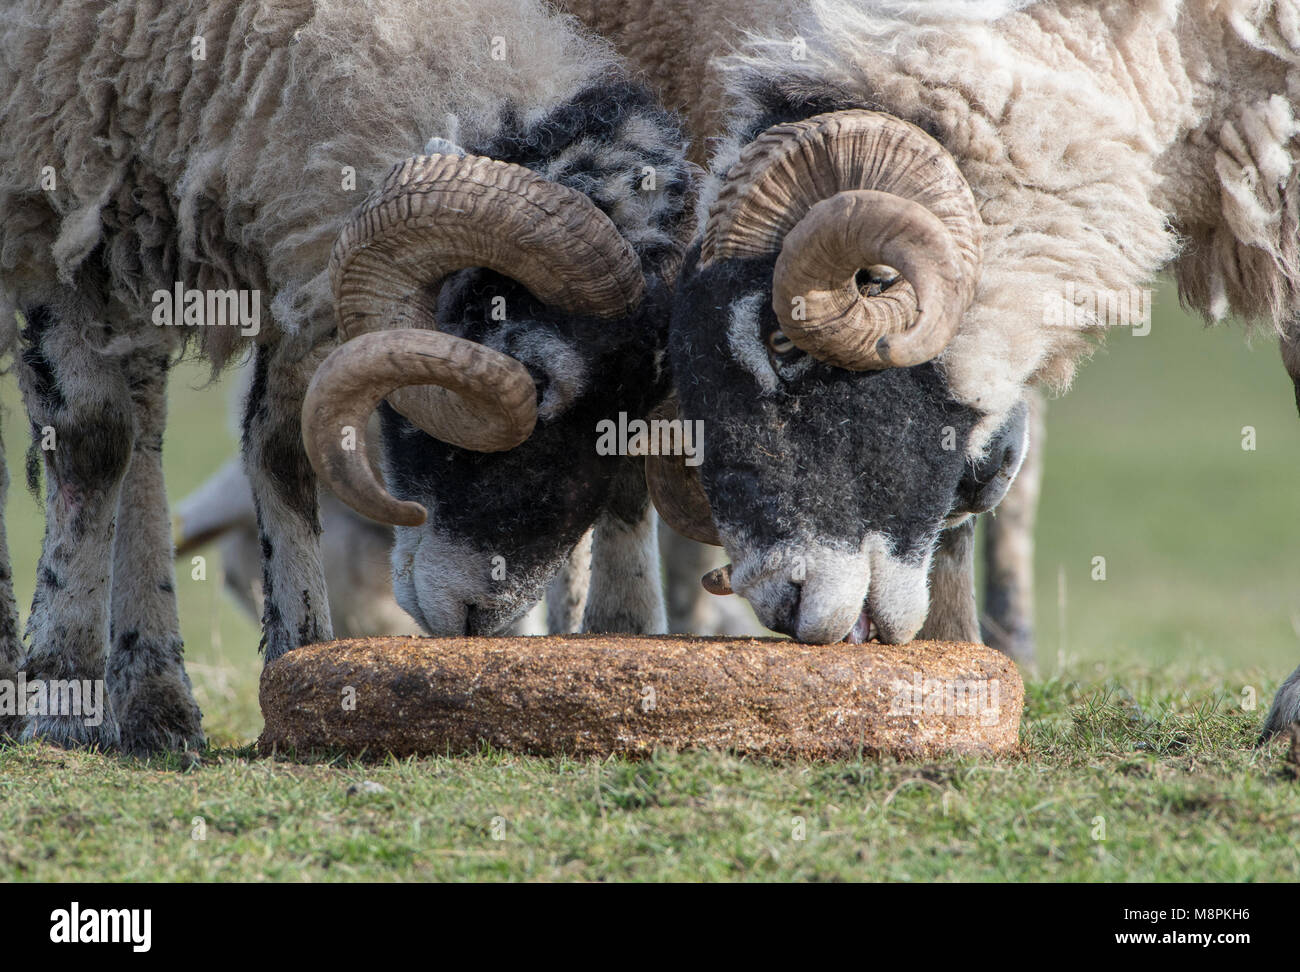 Dunsop Bridge, Lancashire. 19th Mar, 2018.  As upland lambing starts, horned rams take supplementary feed in the form of a cereal and molasses block at Dunsop Bridge, Lancashire, England, United Kingdom. They will have the summer to regain condition until works starts again in the autumn serving the ewes in the flock. Credit: John Eveson/Alamy Live News Stock Photo